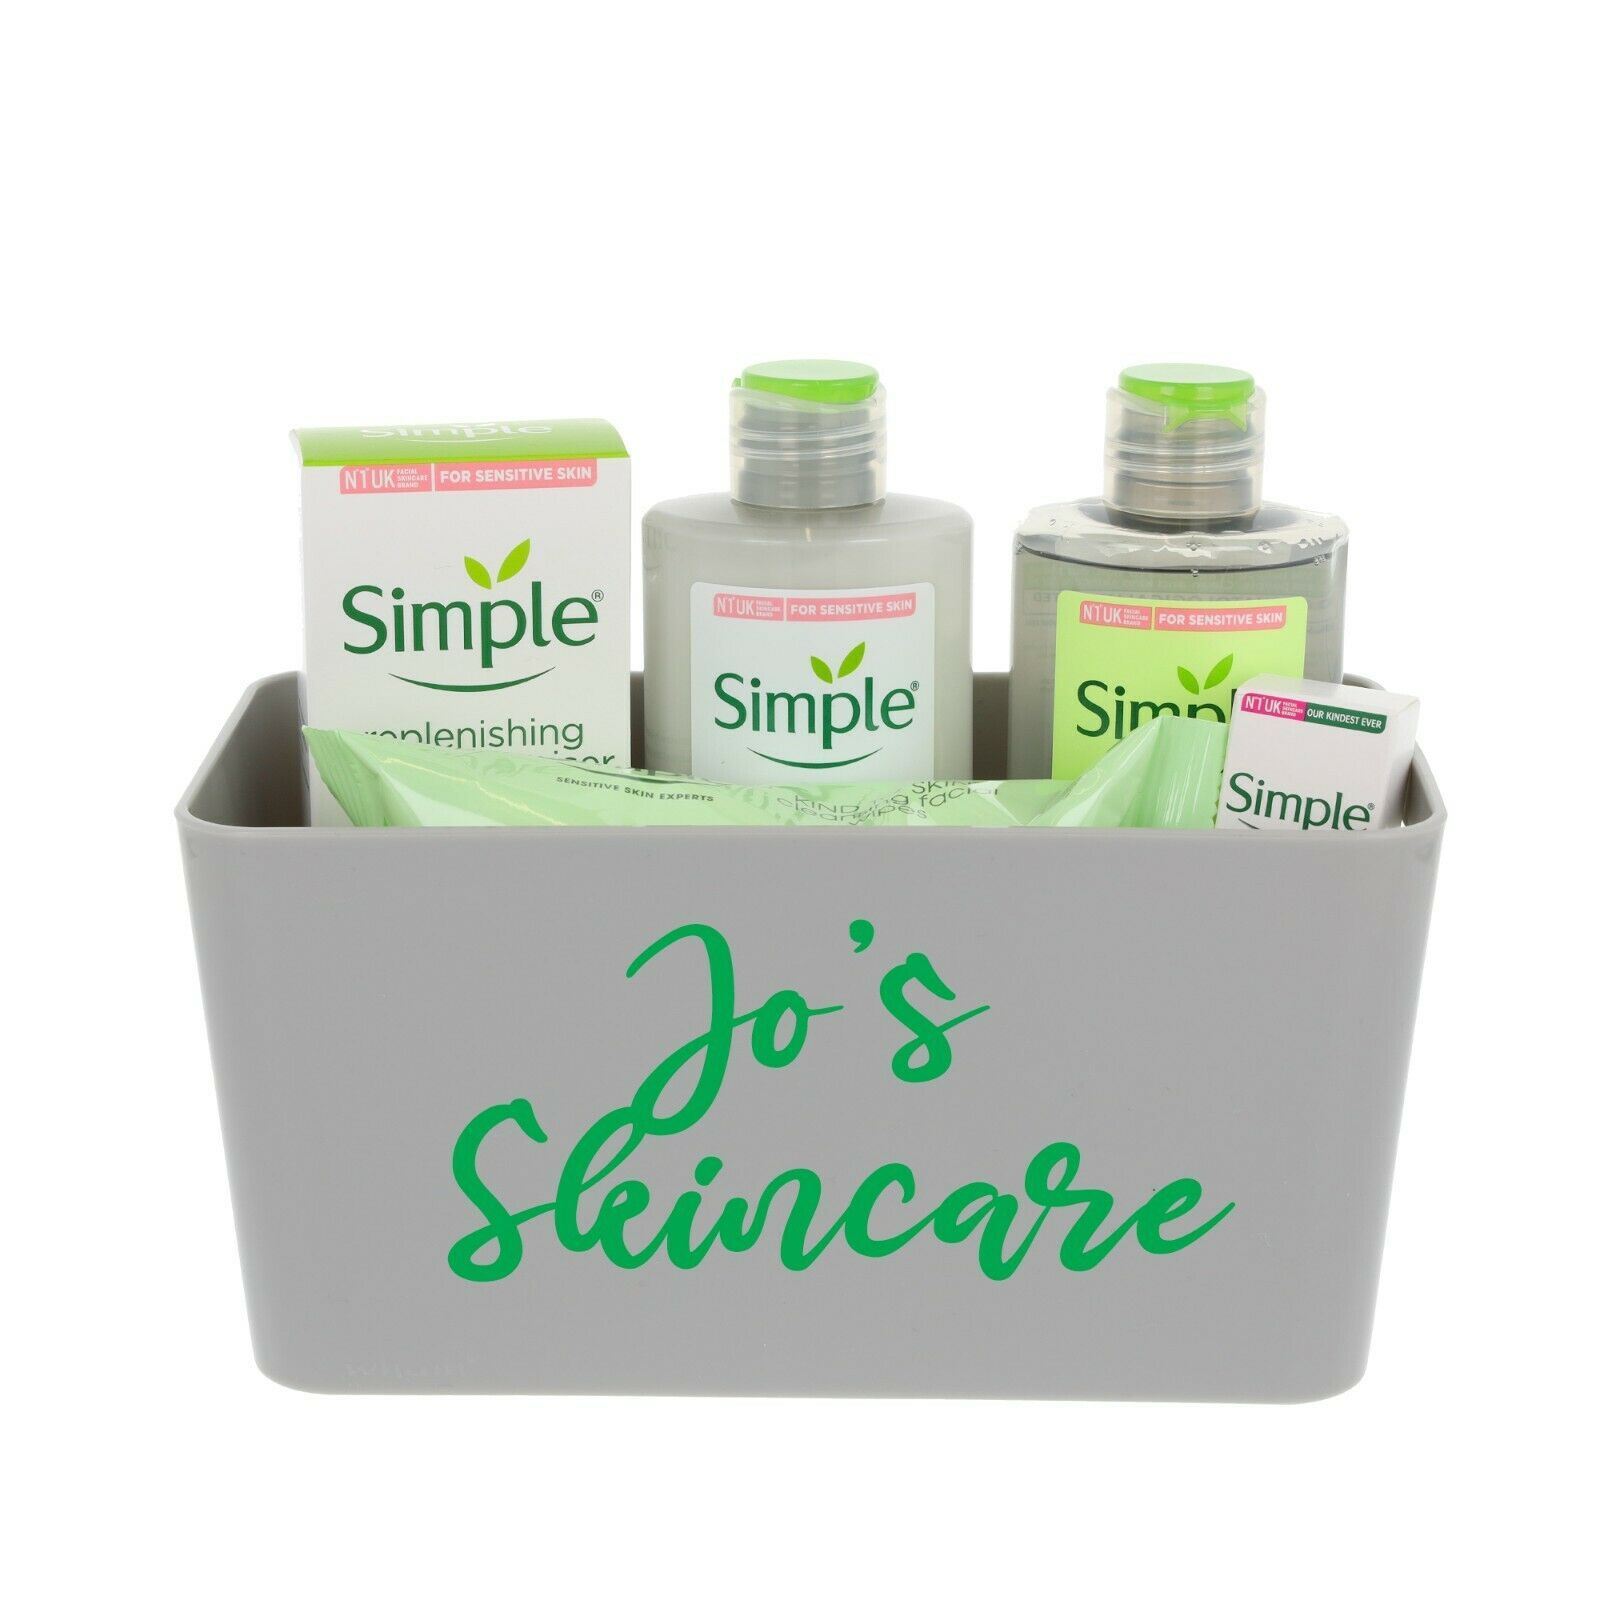 Simple Skincare Filled Personalised Storage Gift Box  - Always Looking Good - Small Grey 